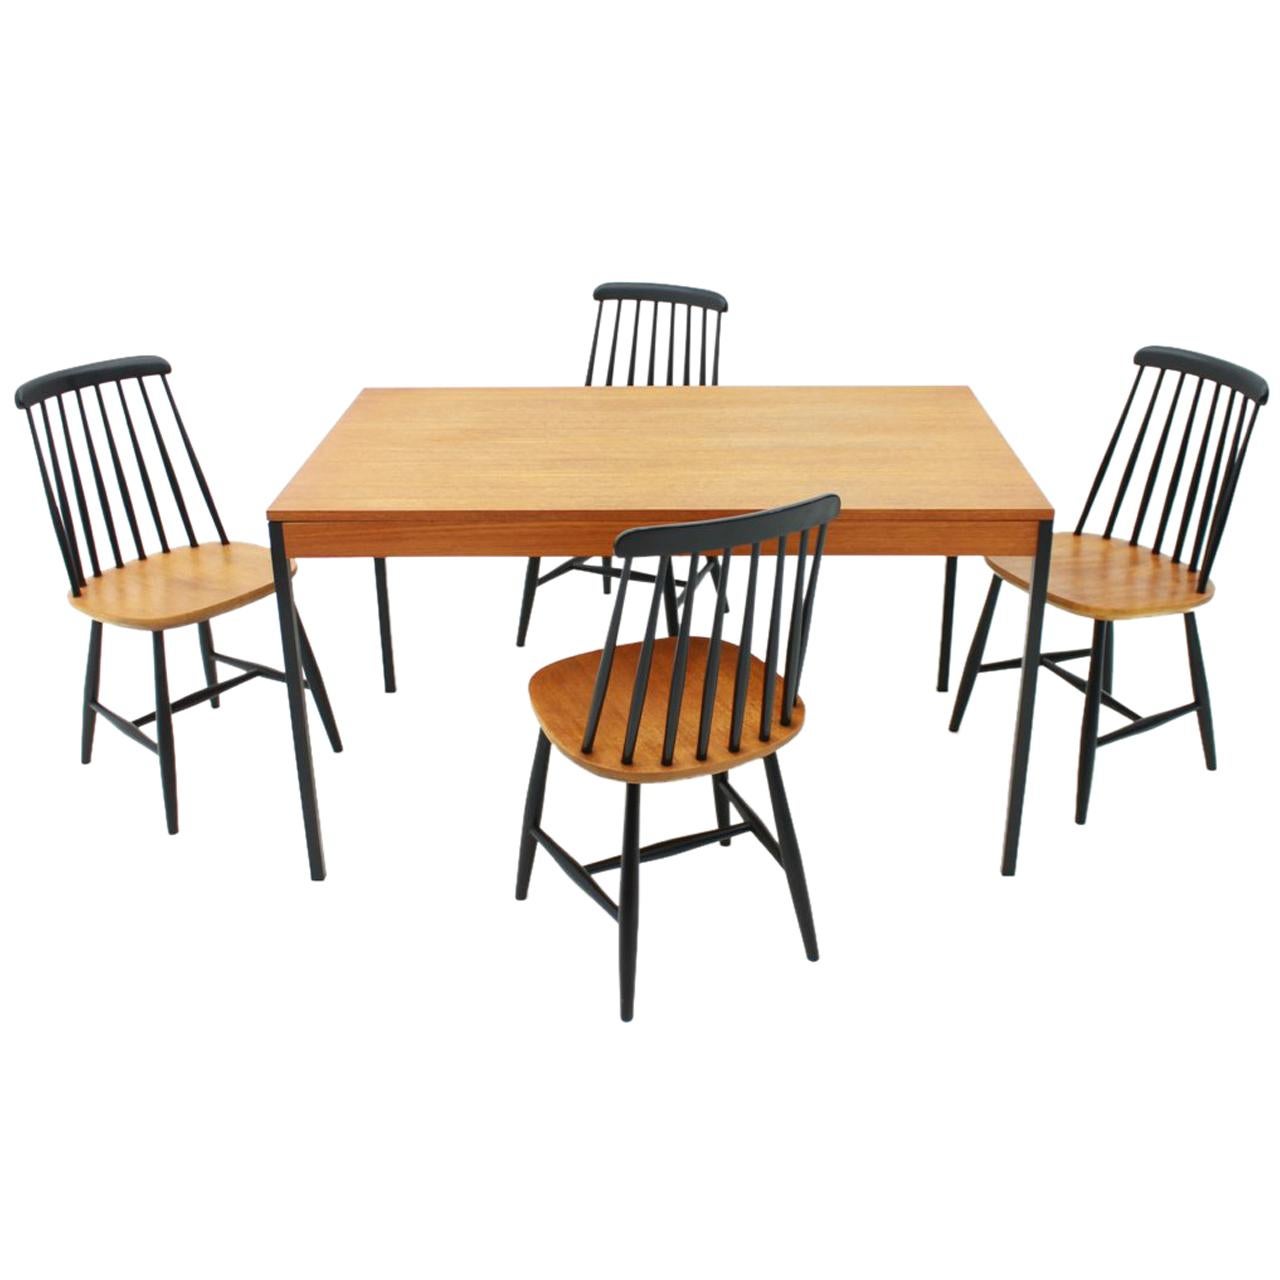 Scandinavian Teak Dining Room Suite Table and Chairs by Nesto Sweden 1950s For Sale